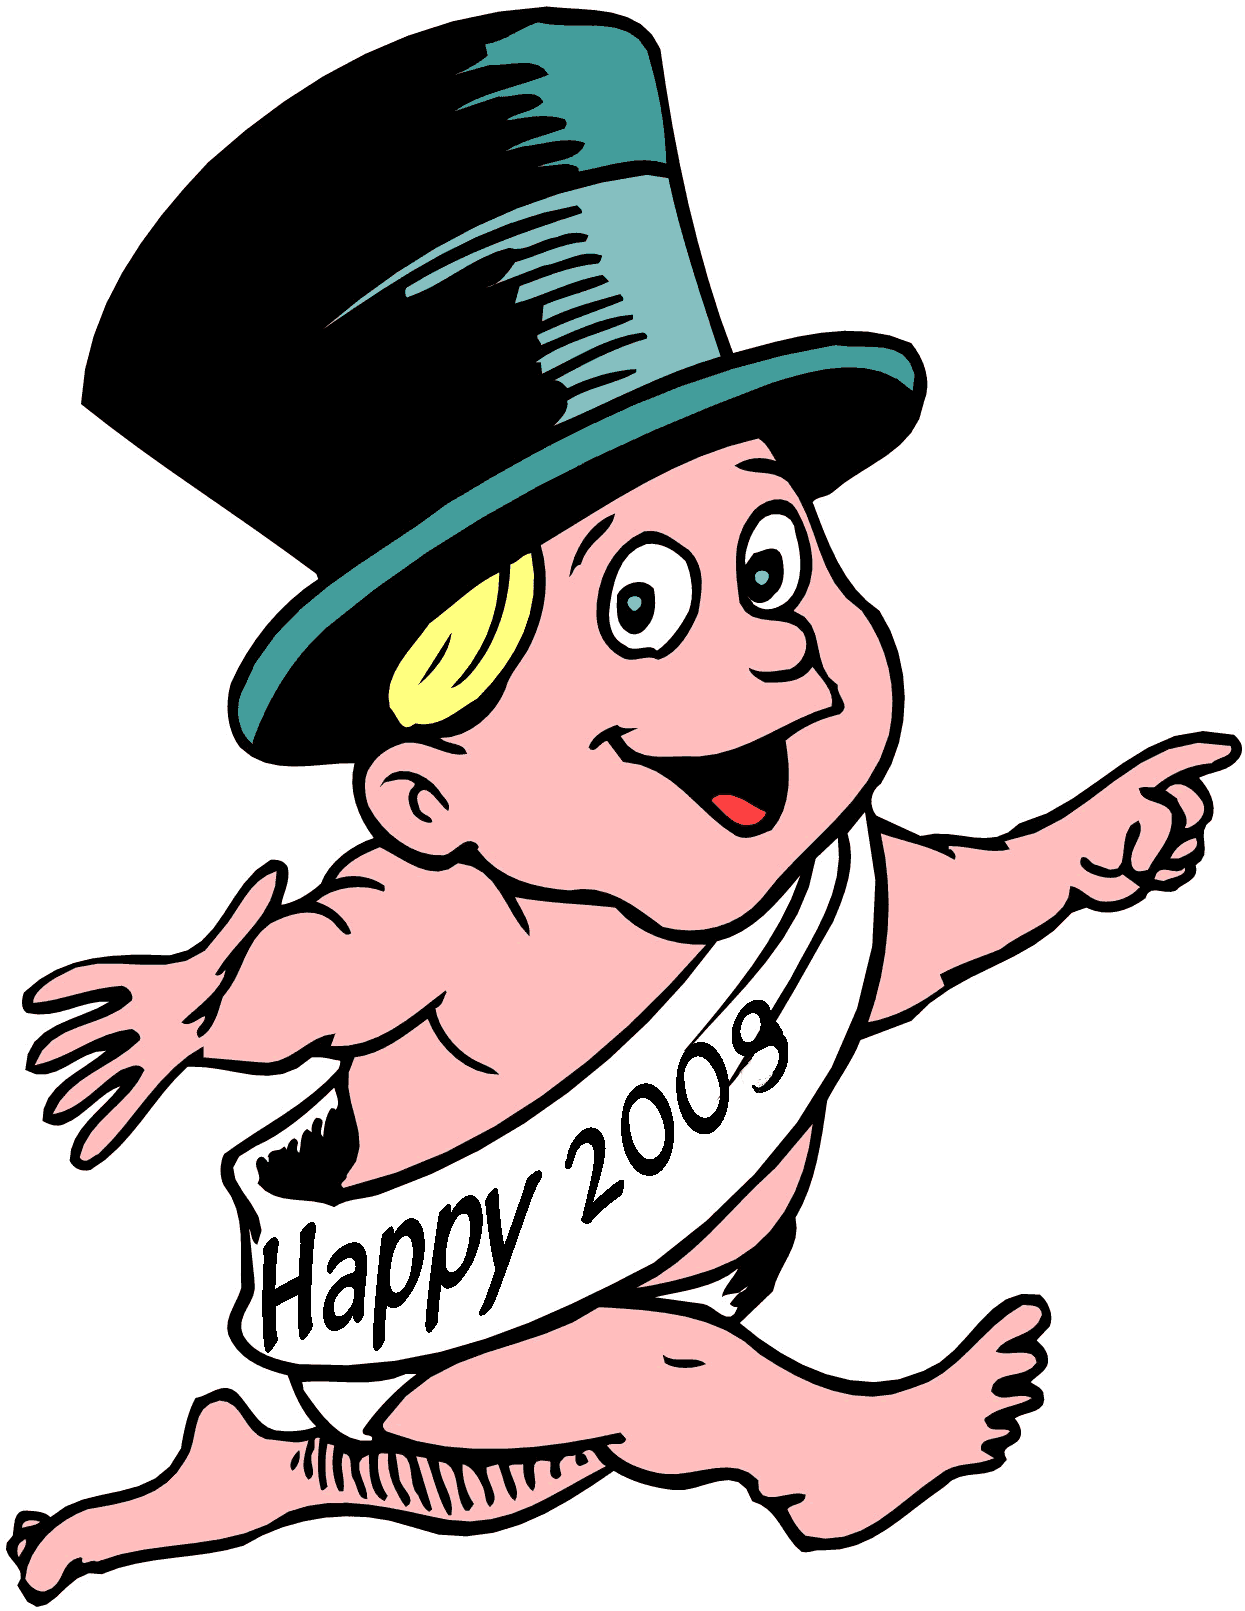 Index Of  Website Clipart Pictures Videos 2011 New Year Graphics